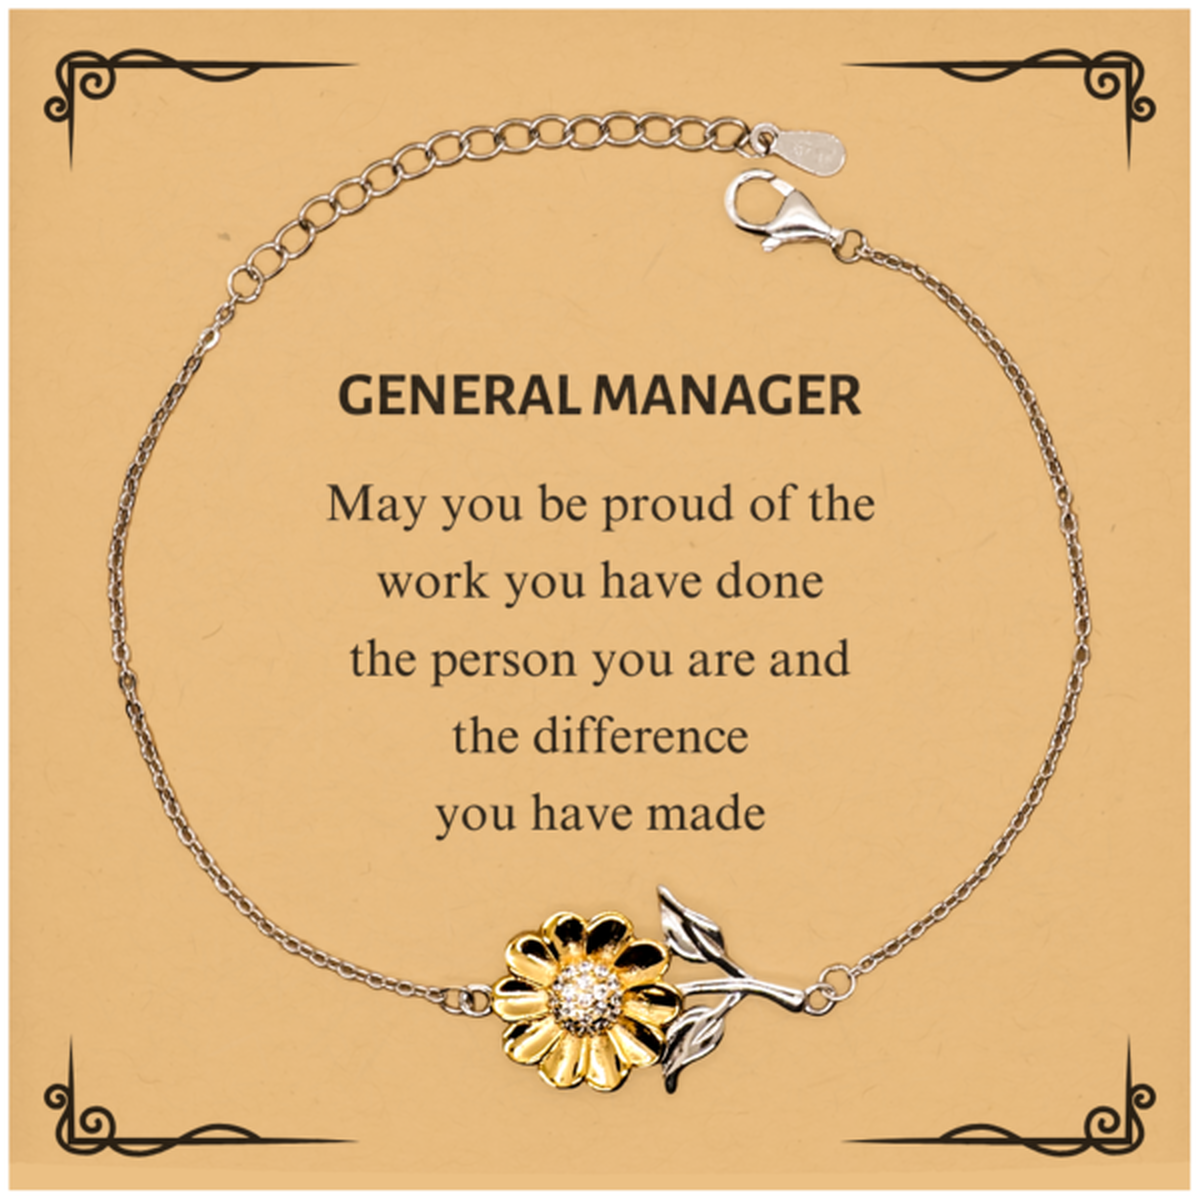 General Manager May you be proud of the work you have done, Retirement General Manager Sunflower Bracelet for Colleague Appreciation Gifts Amazing for General Manager